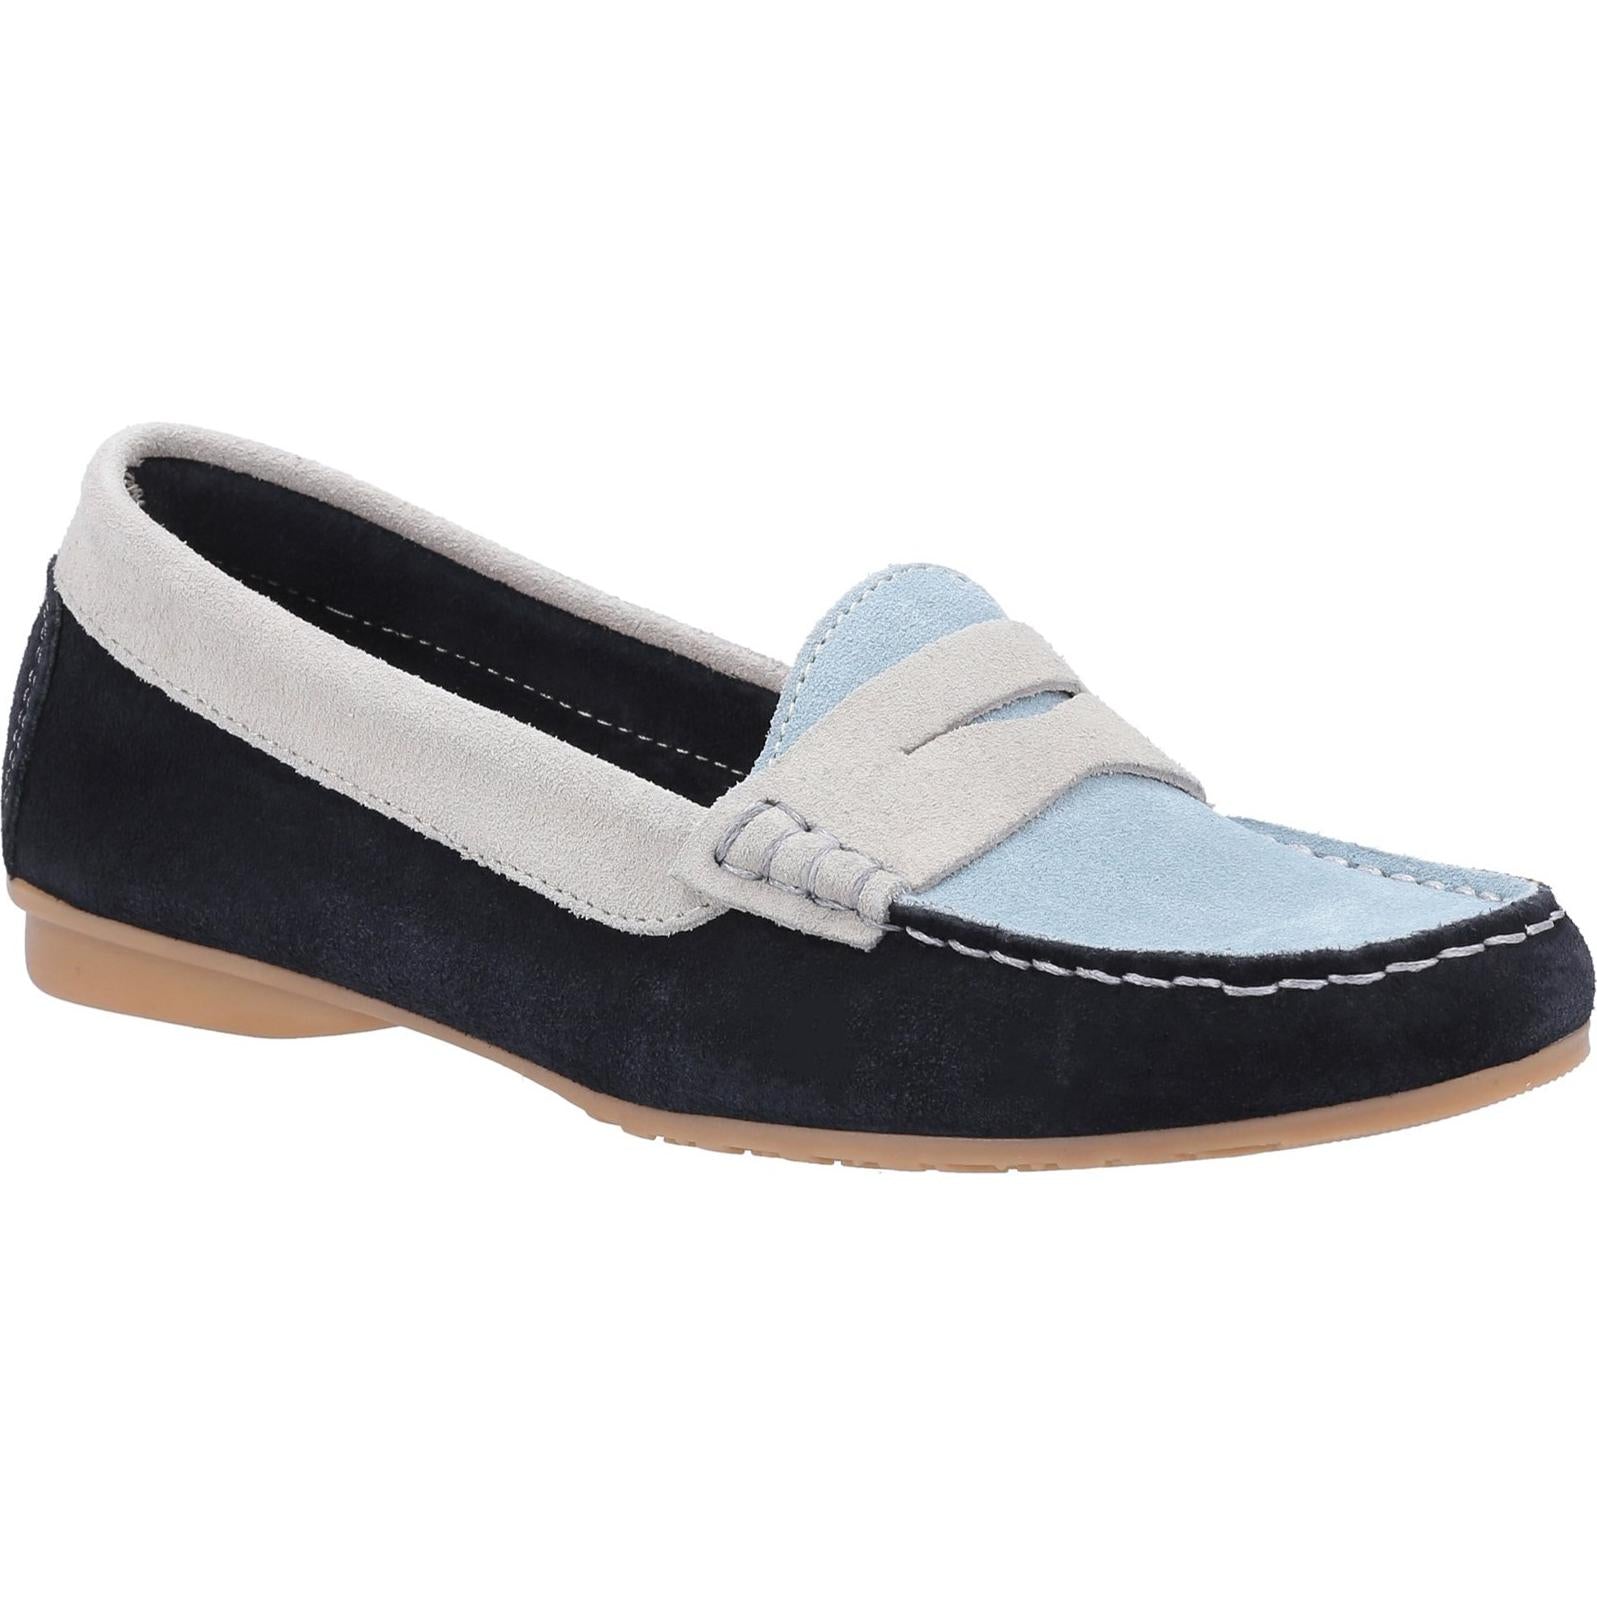 Riva Banyoles Moccasin with Tassel Flats